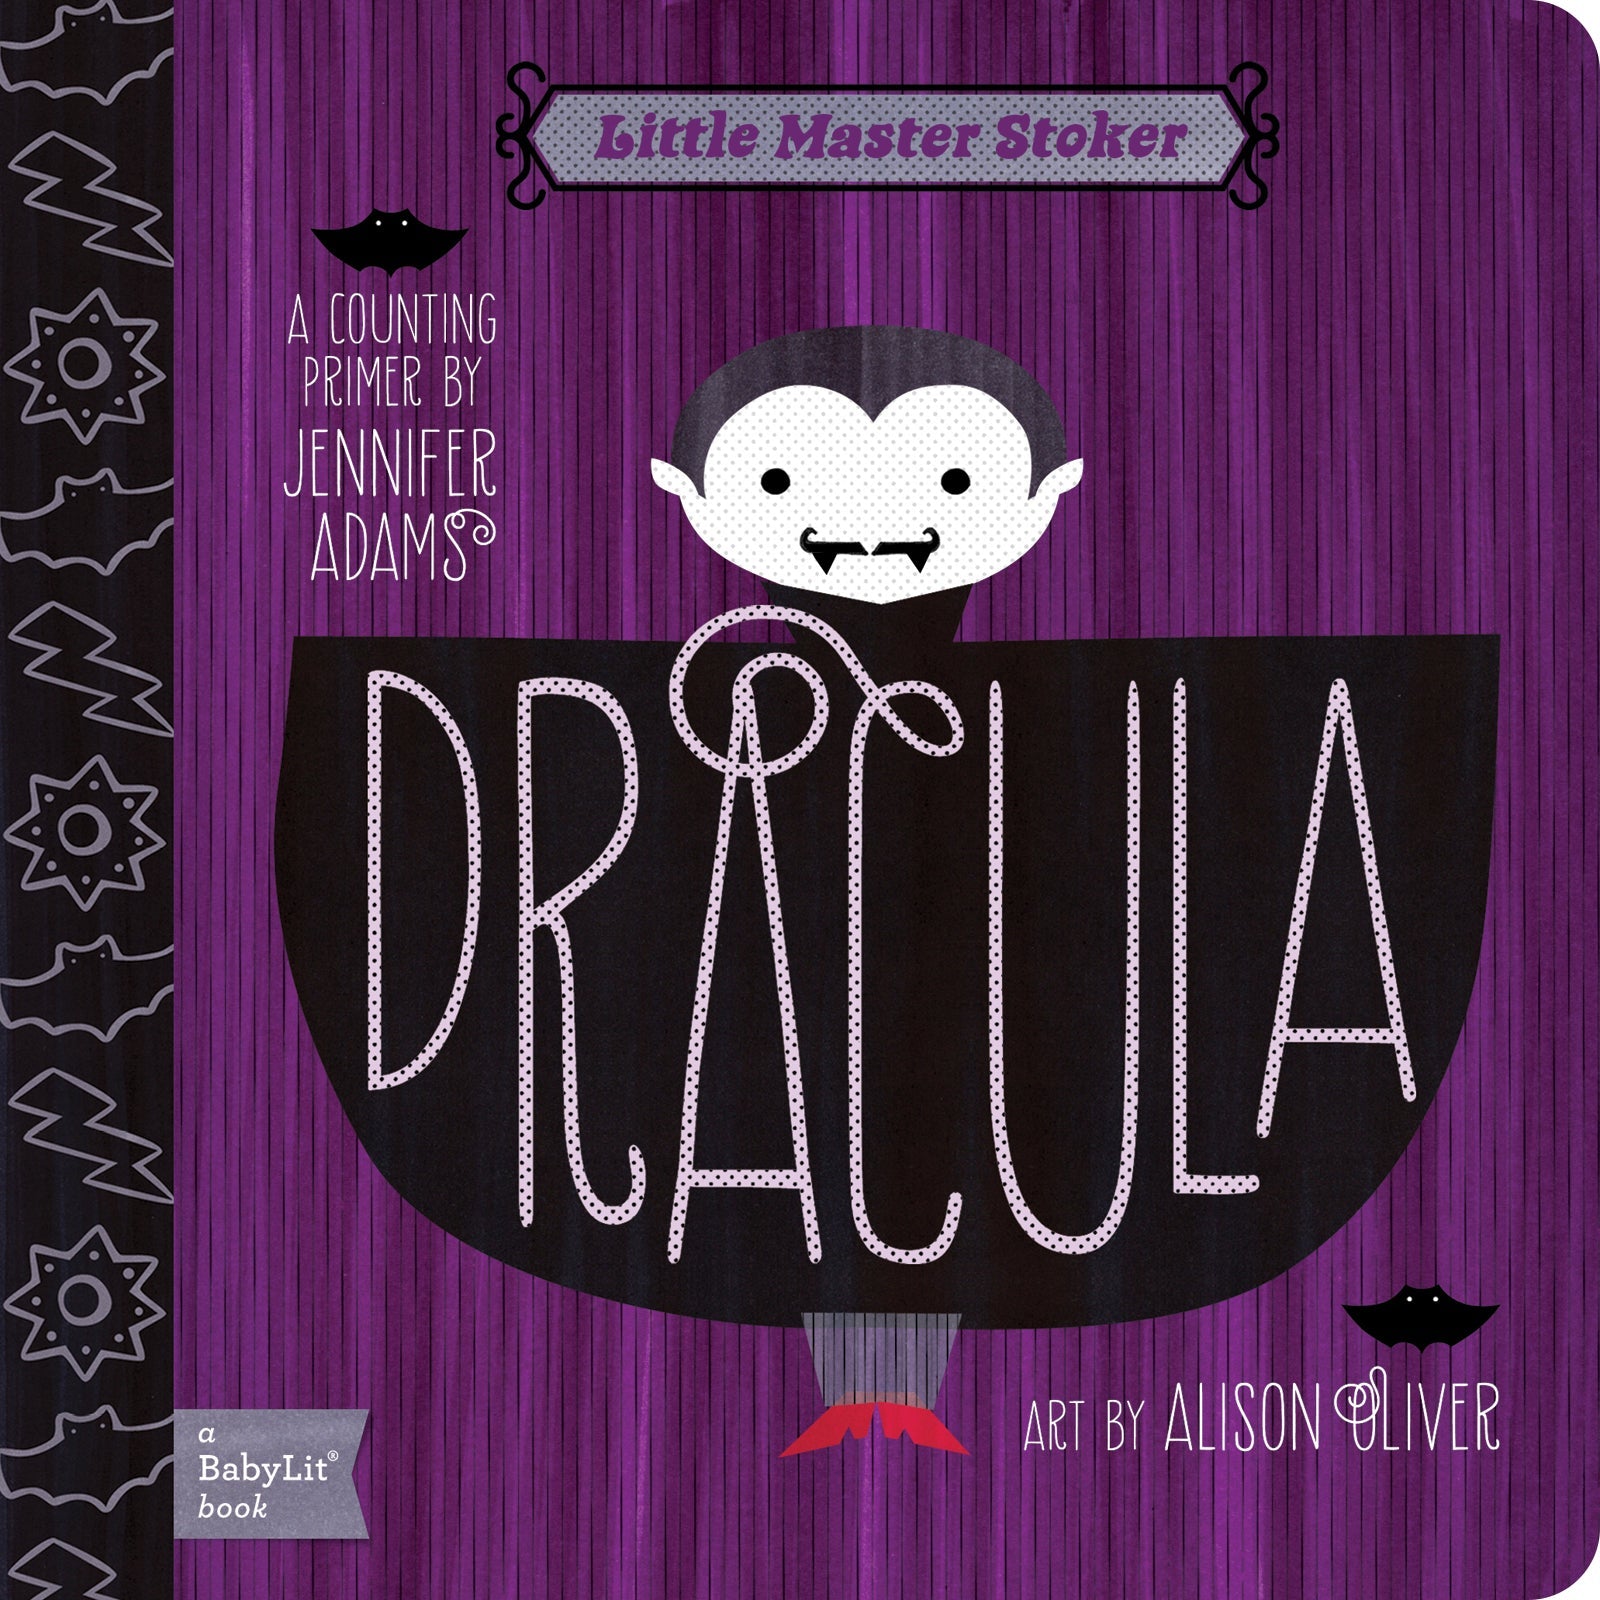 Dracula | A BabyLit Counting Primer